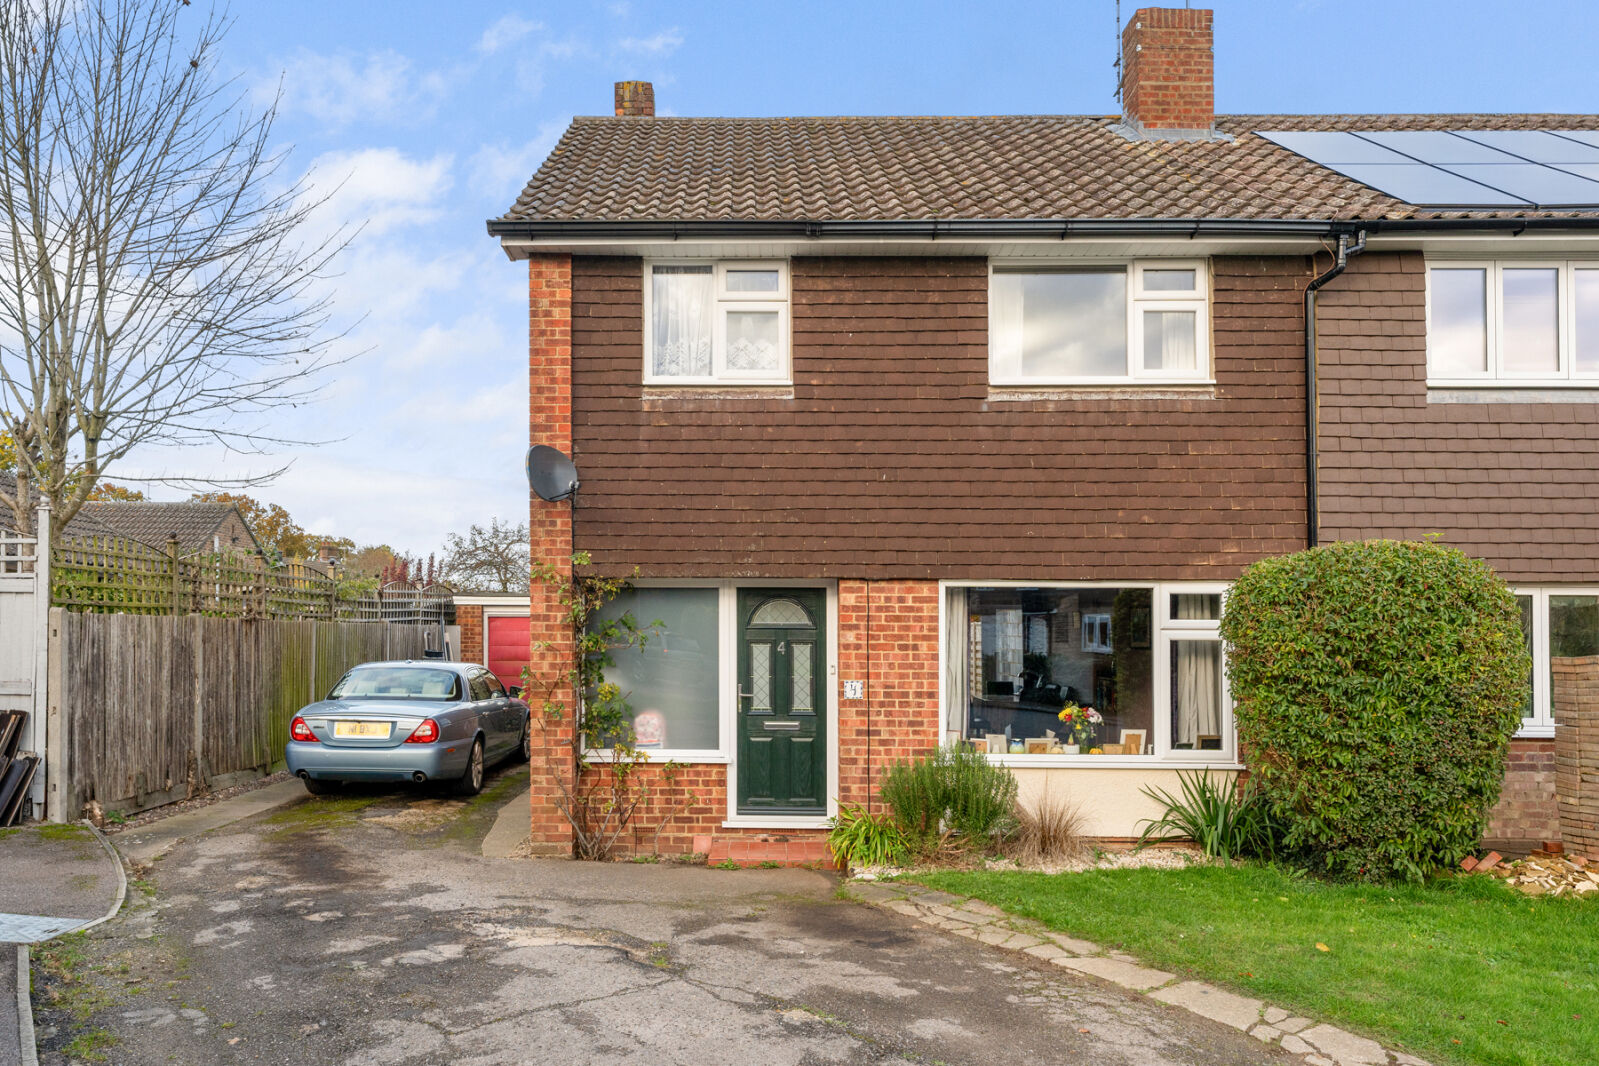 3 bedroom semi detached house for sale The Campions, Stansted, CM24, main image